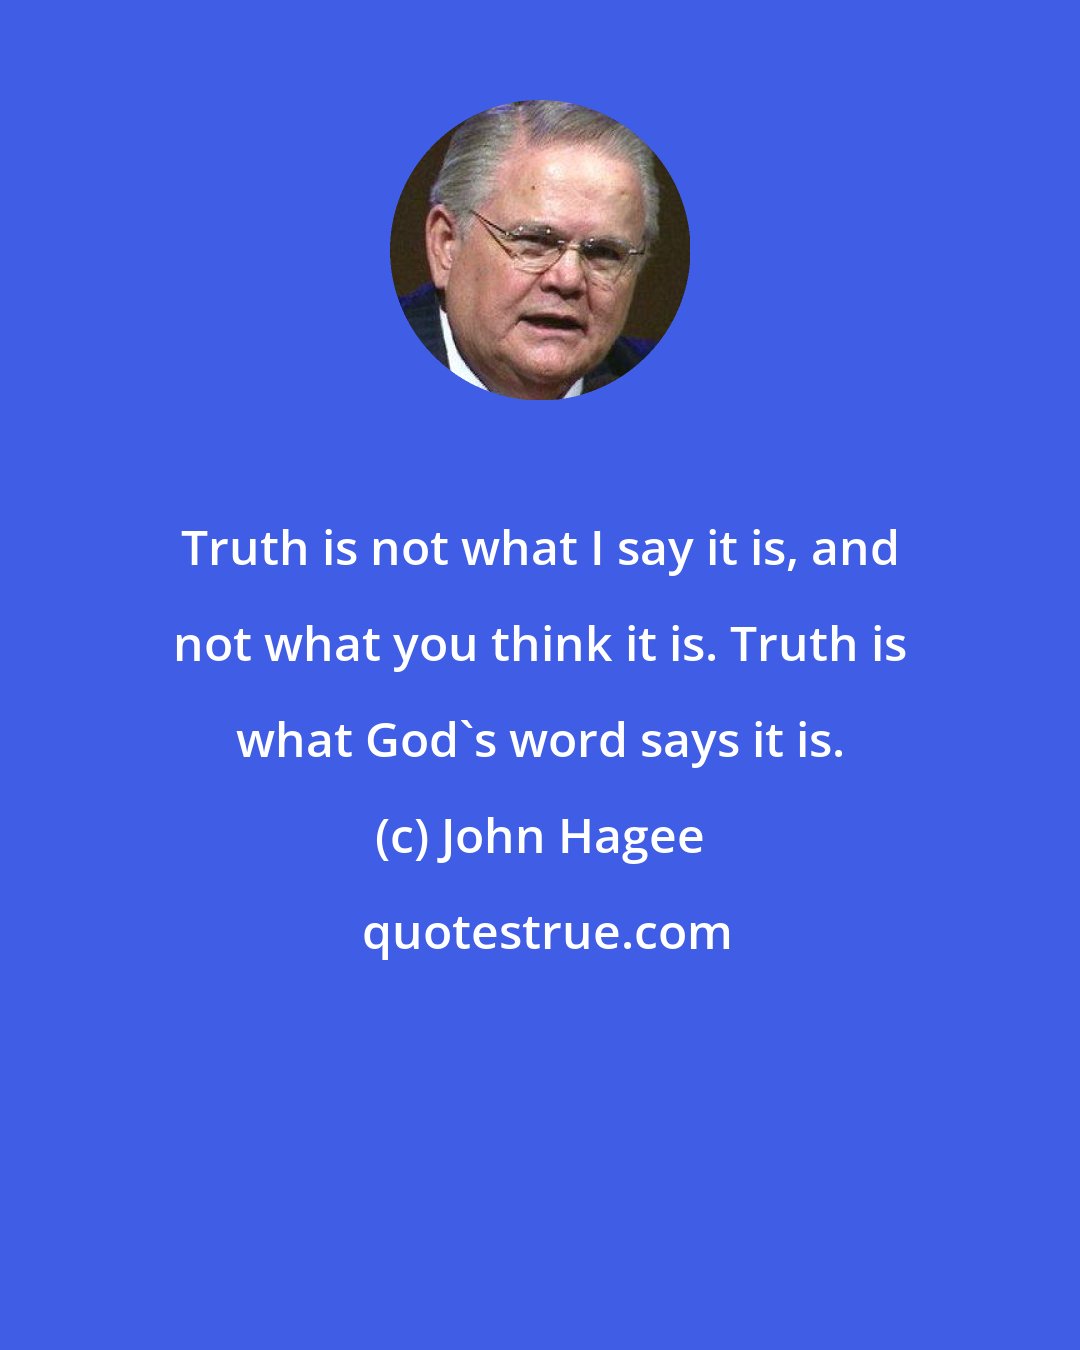 John Hagee: Truth is not what I say it is, and not what you think it is. Truth is what God's word says it is.